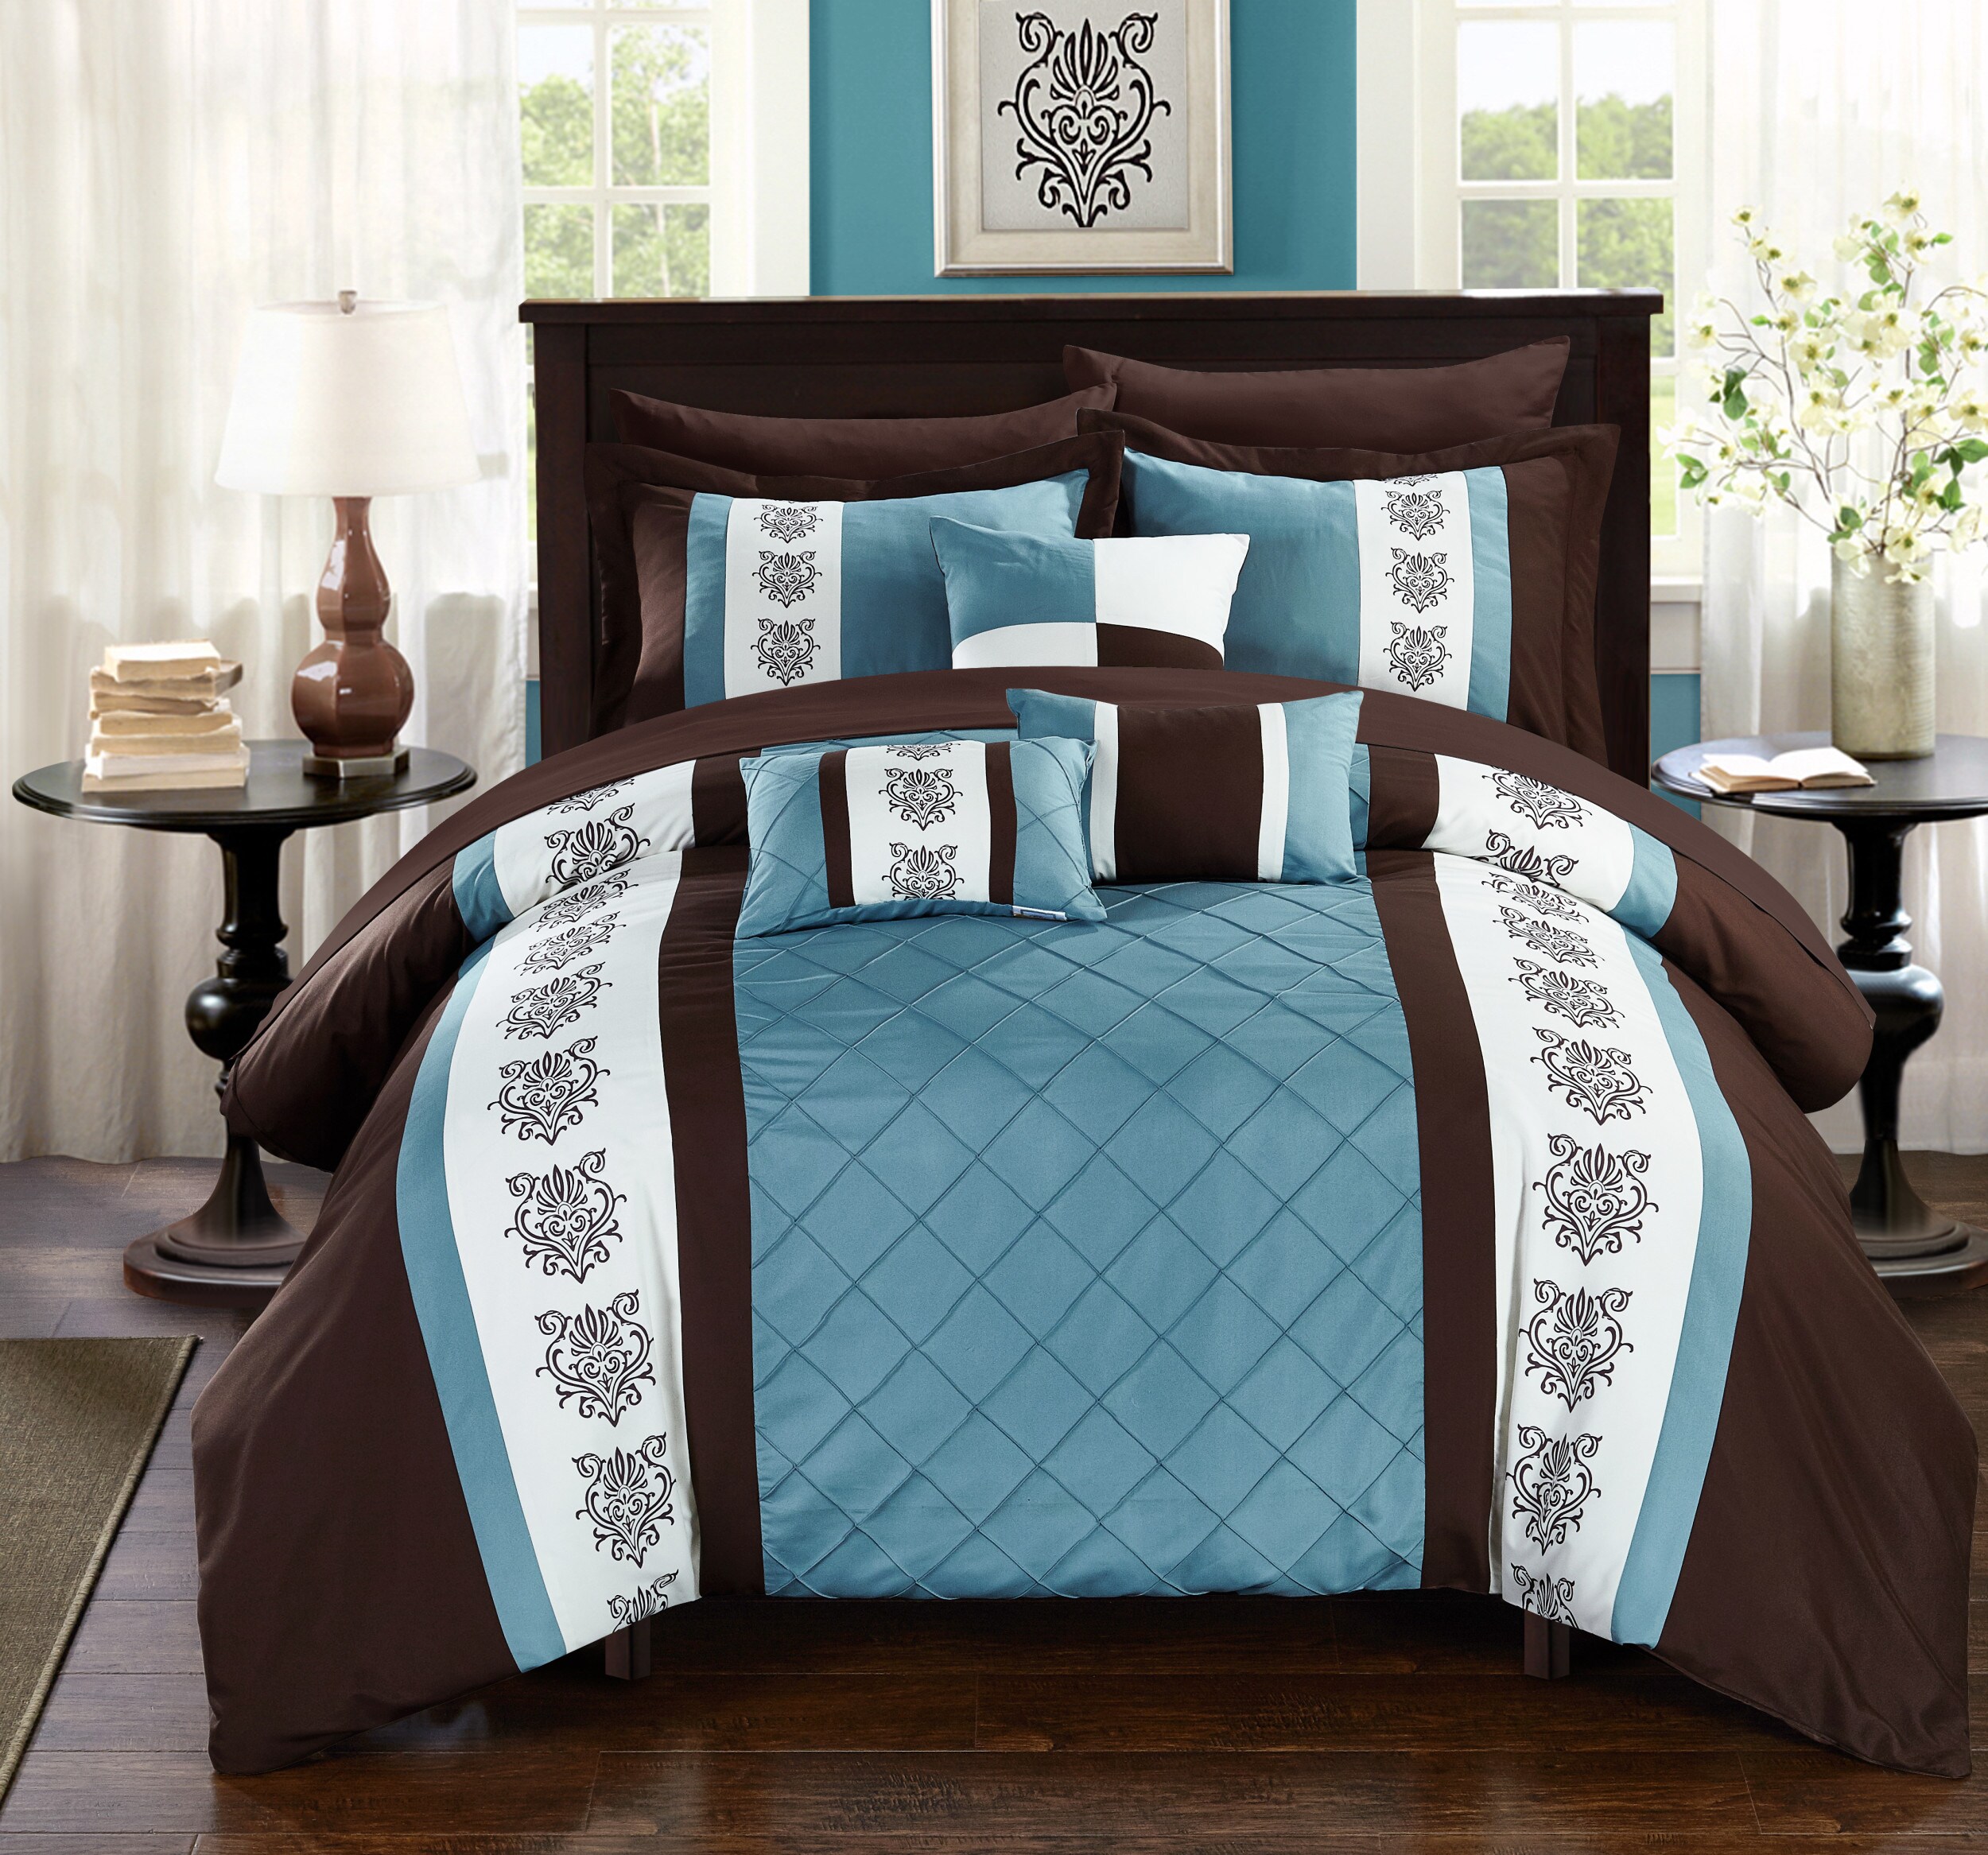 Chic Home Design Ayelet 10-Piece Burgundy Queen Comforter Set in the  Bedding Sets department at